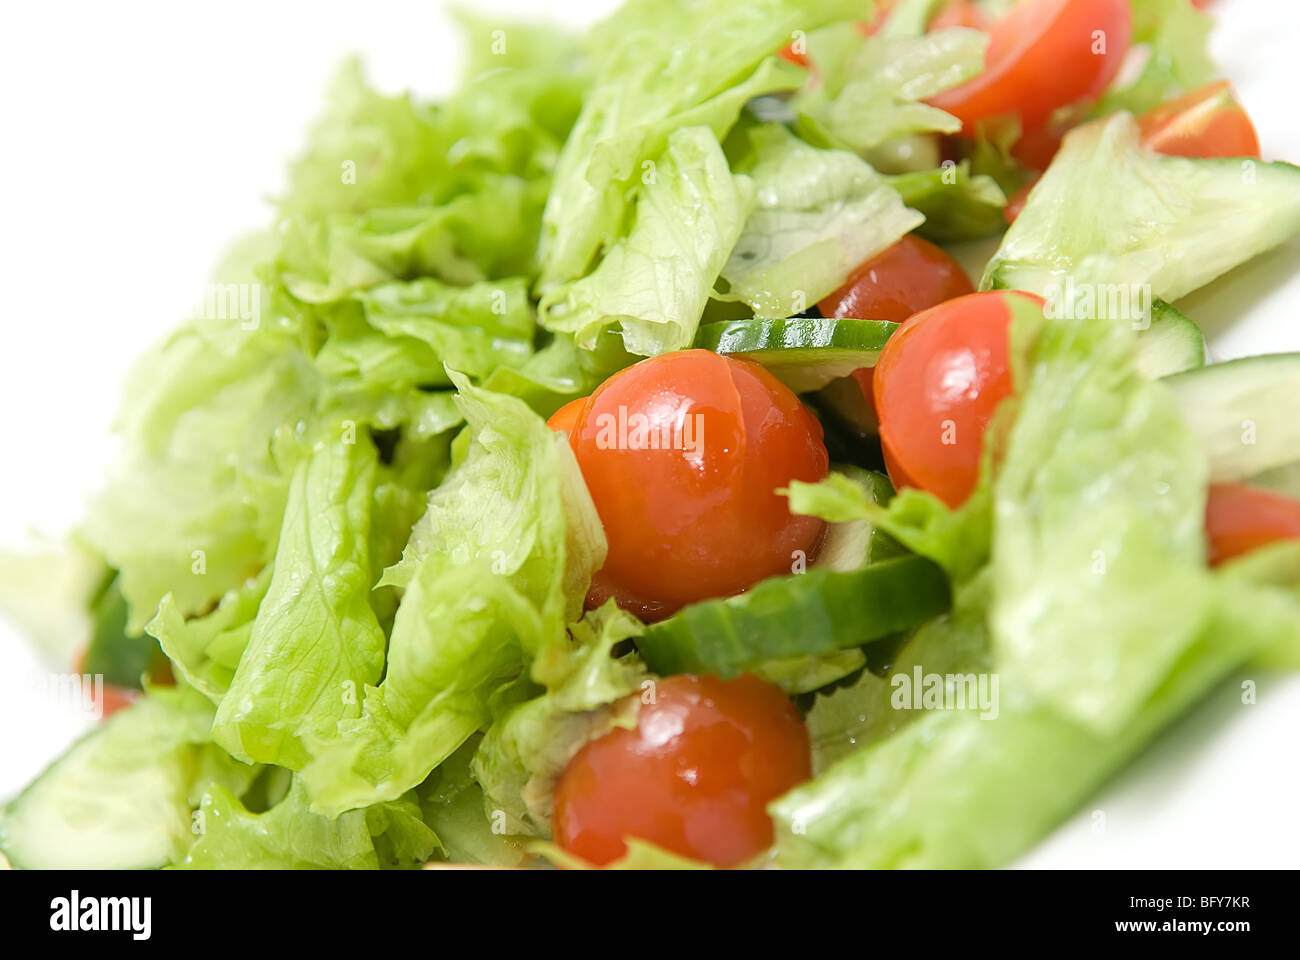 salad with cucumber and tomato Stock Photo